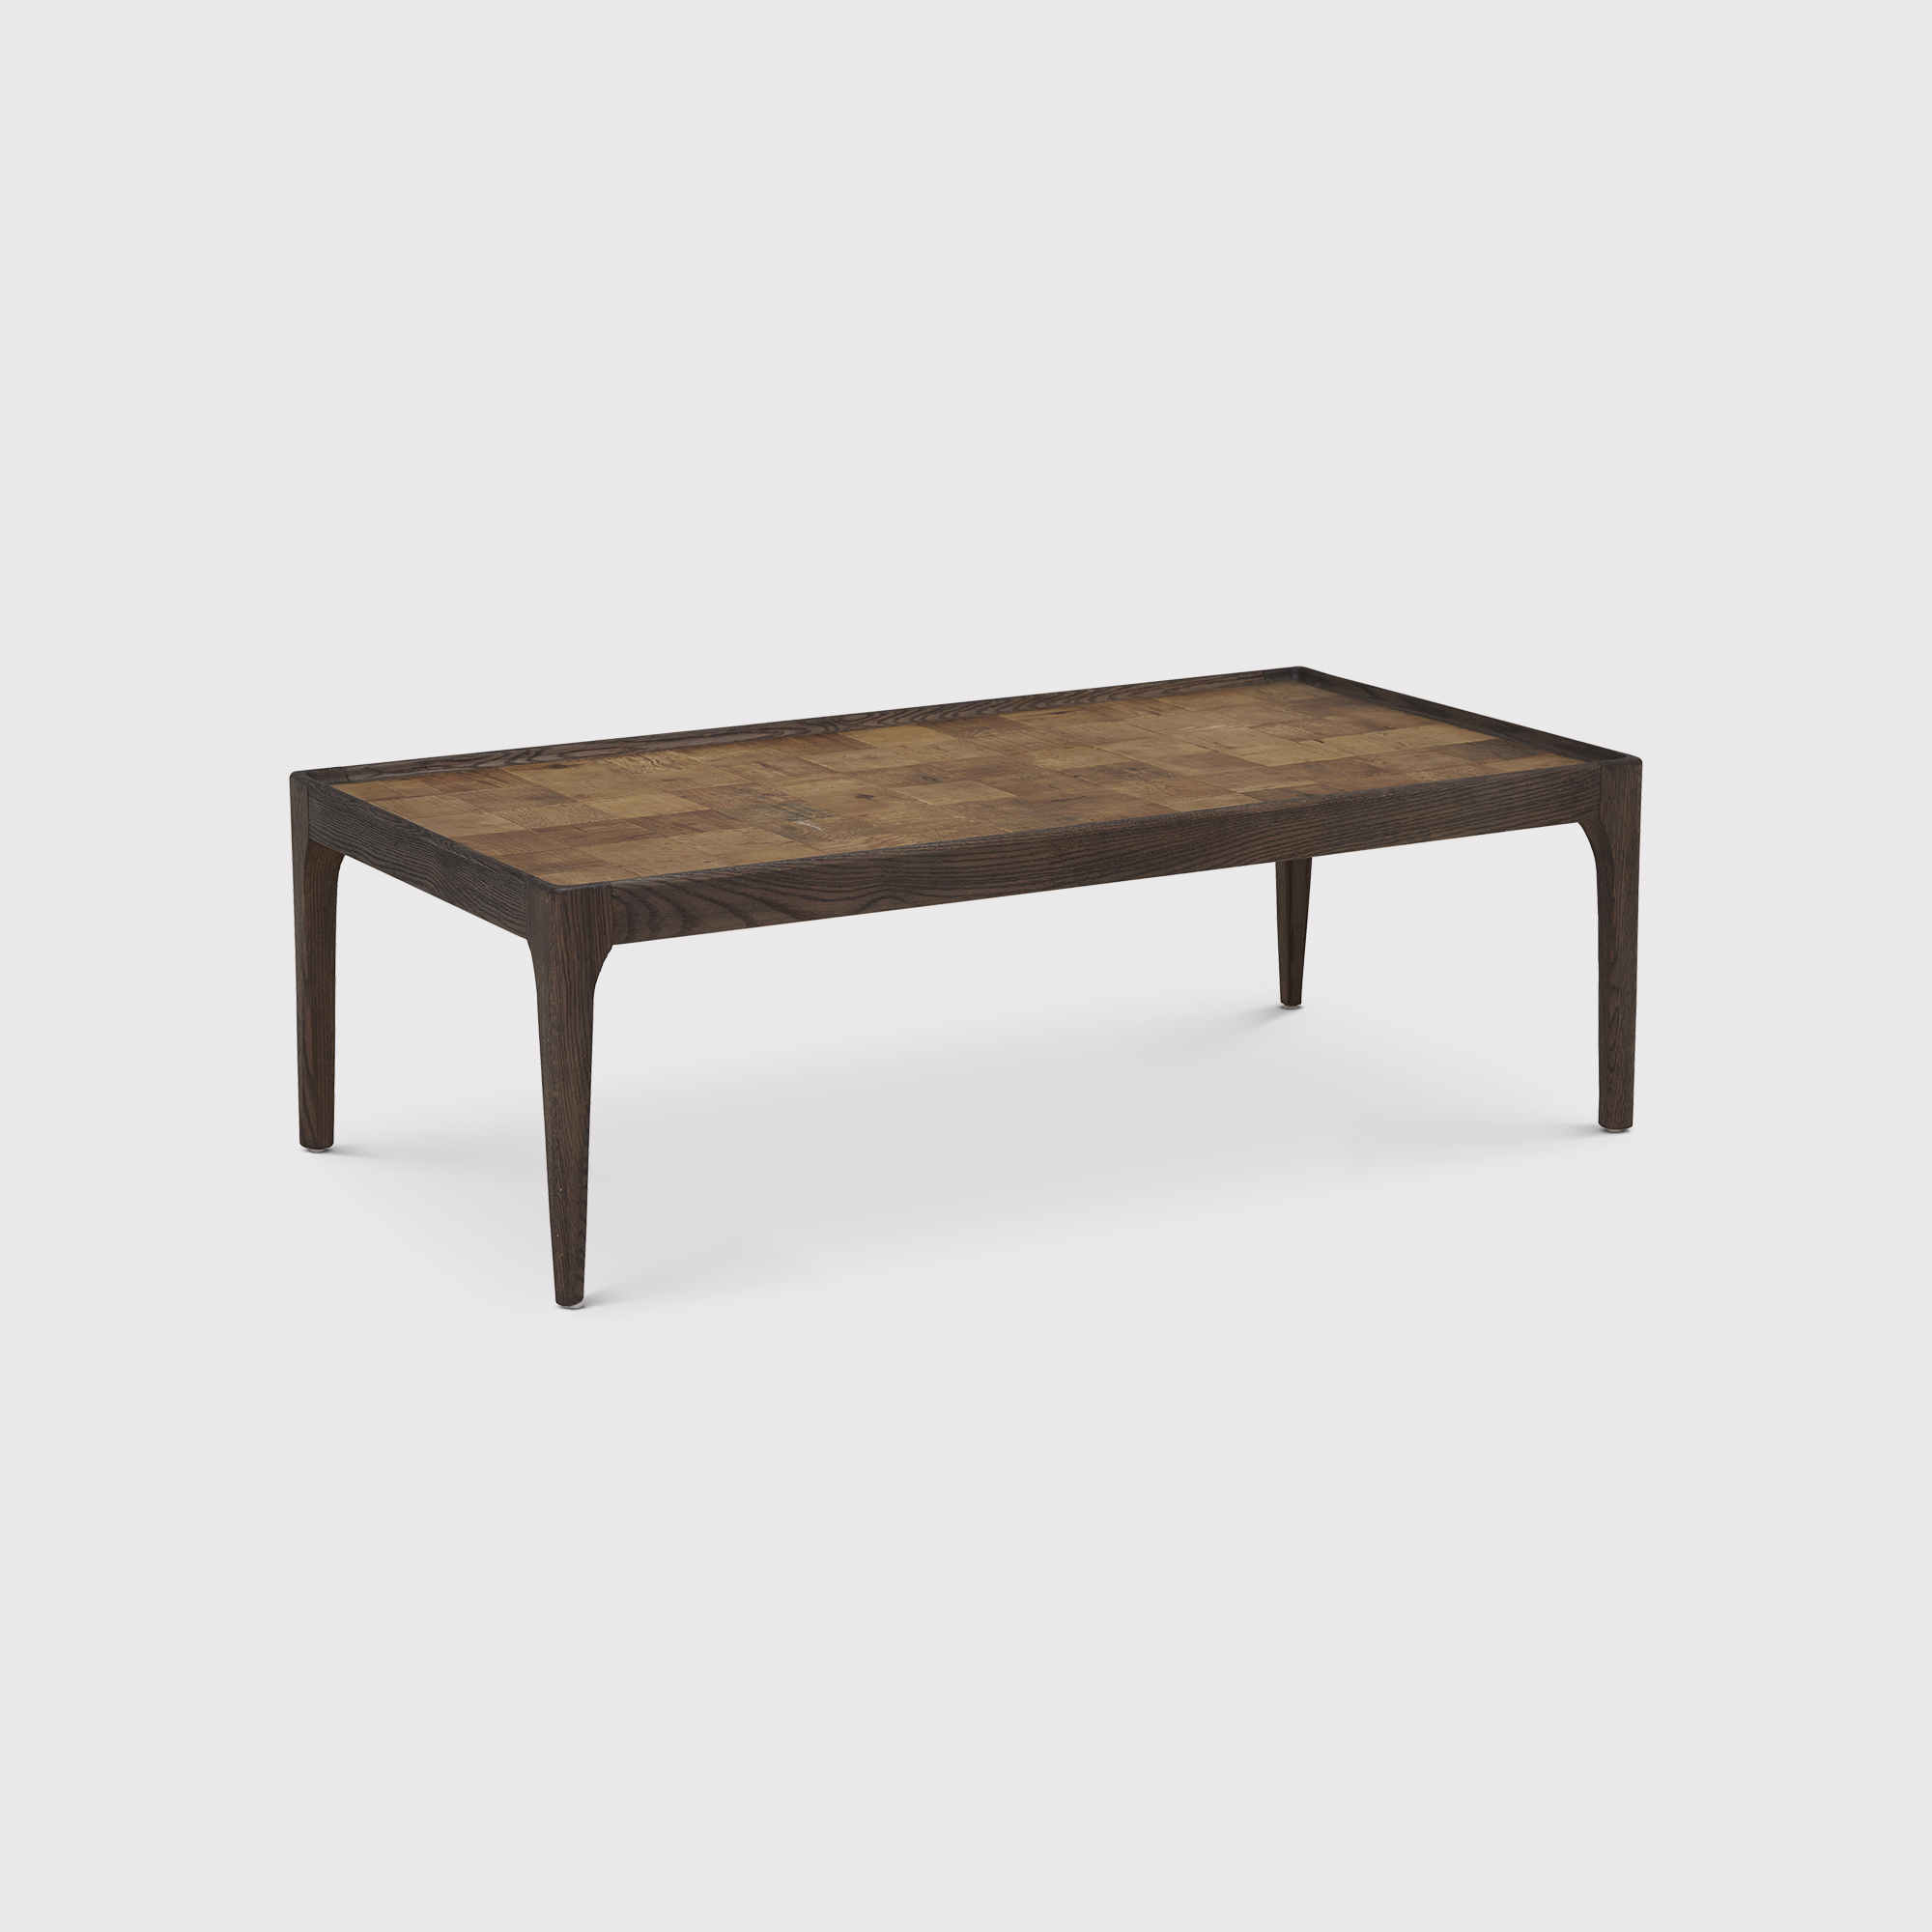 Jude Coffee Table With Inlay, Brown | Barker & Stonehouse